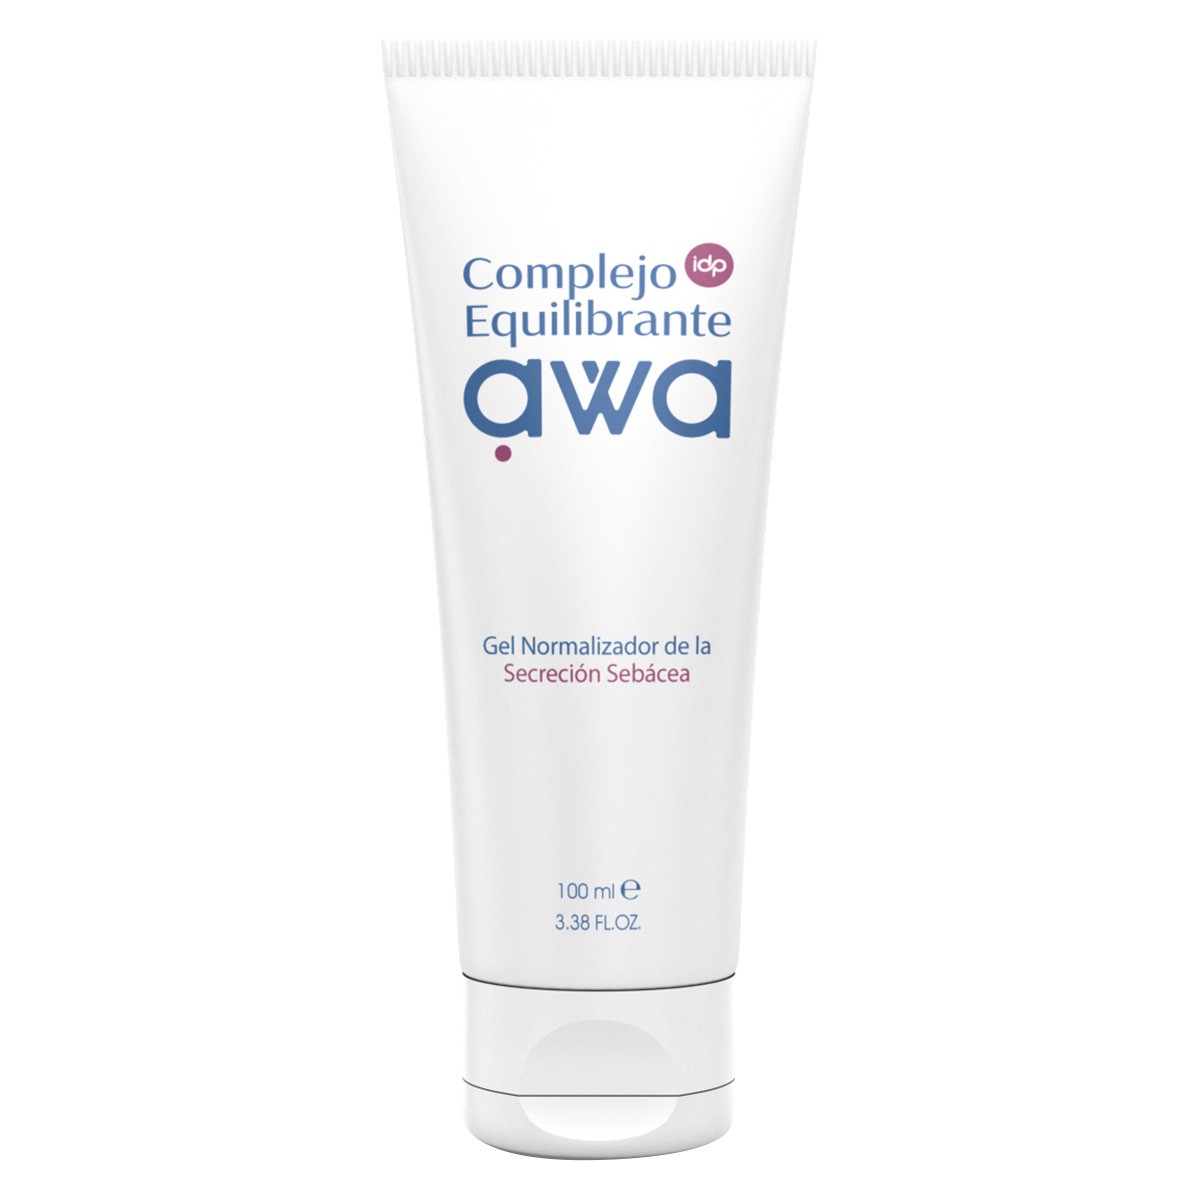 AWA complejo equilibrante 100ml